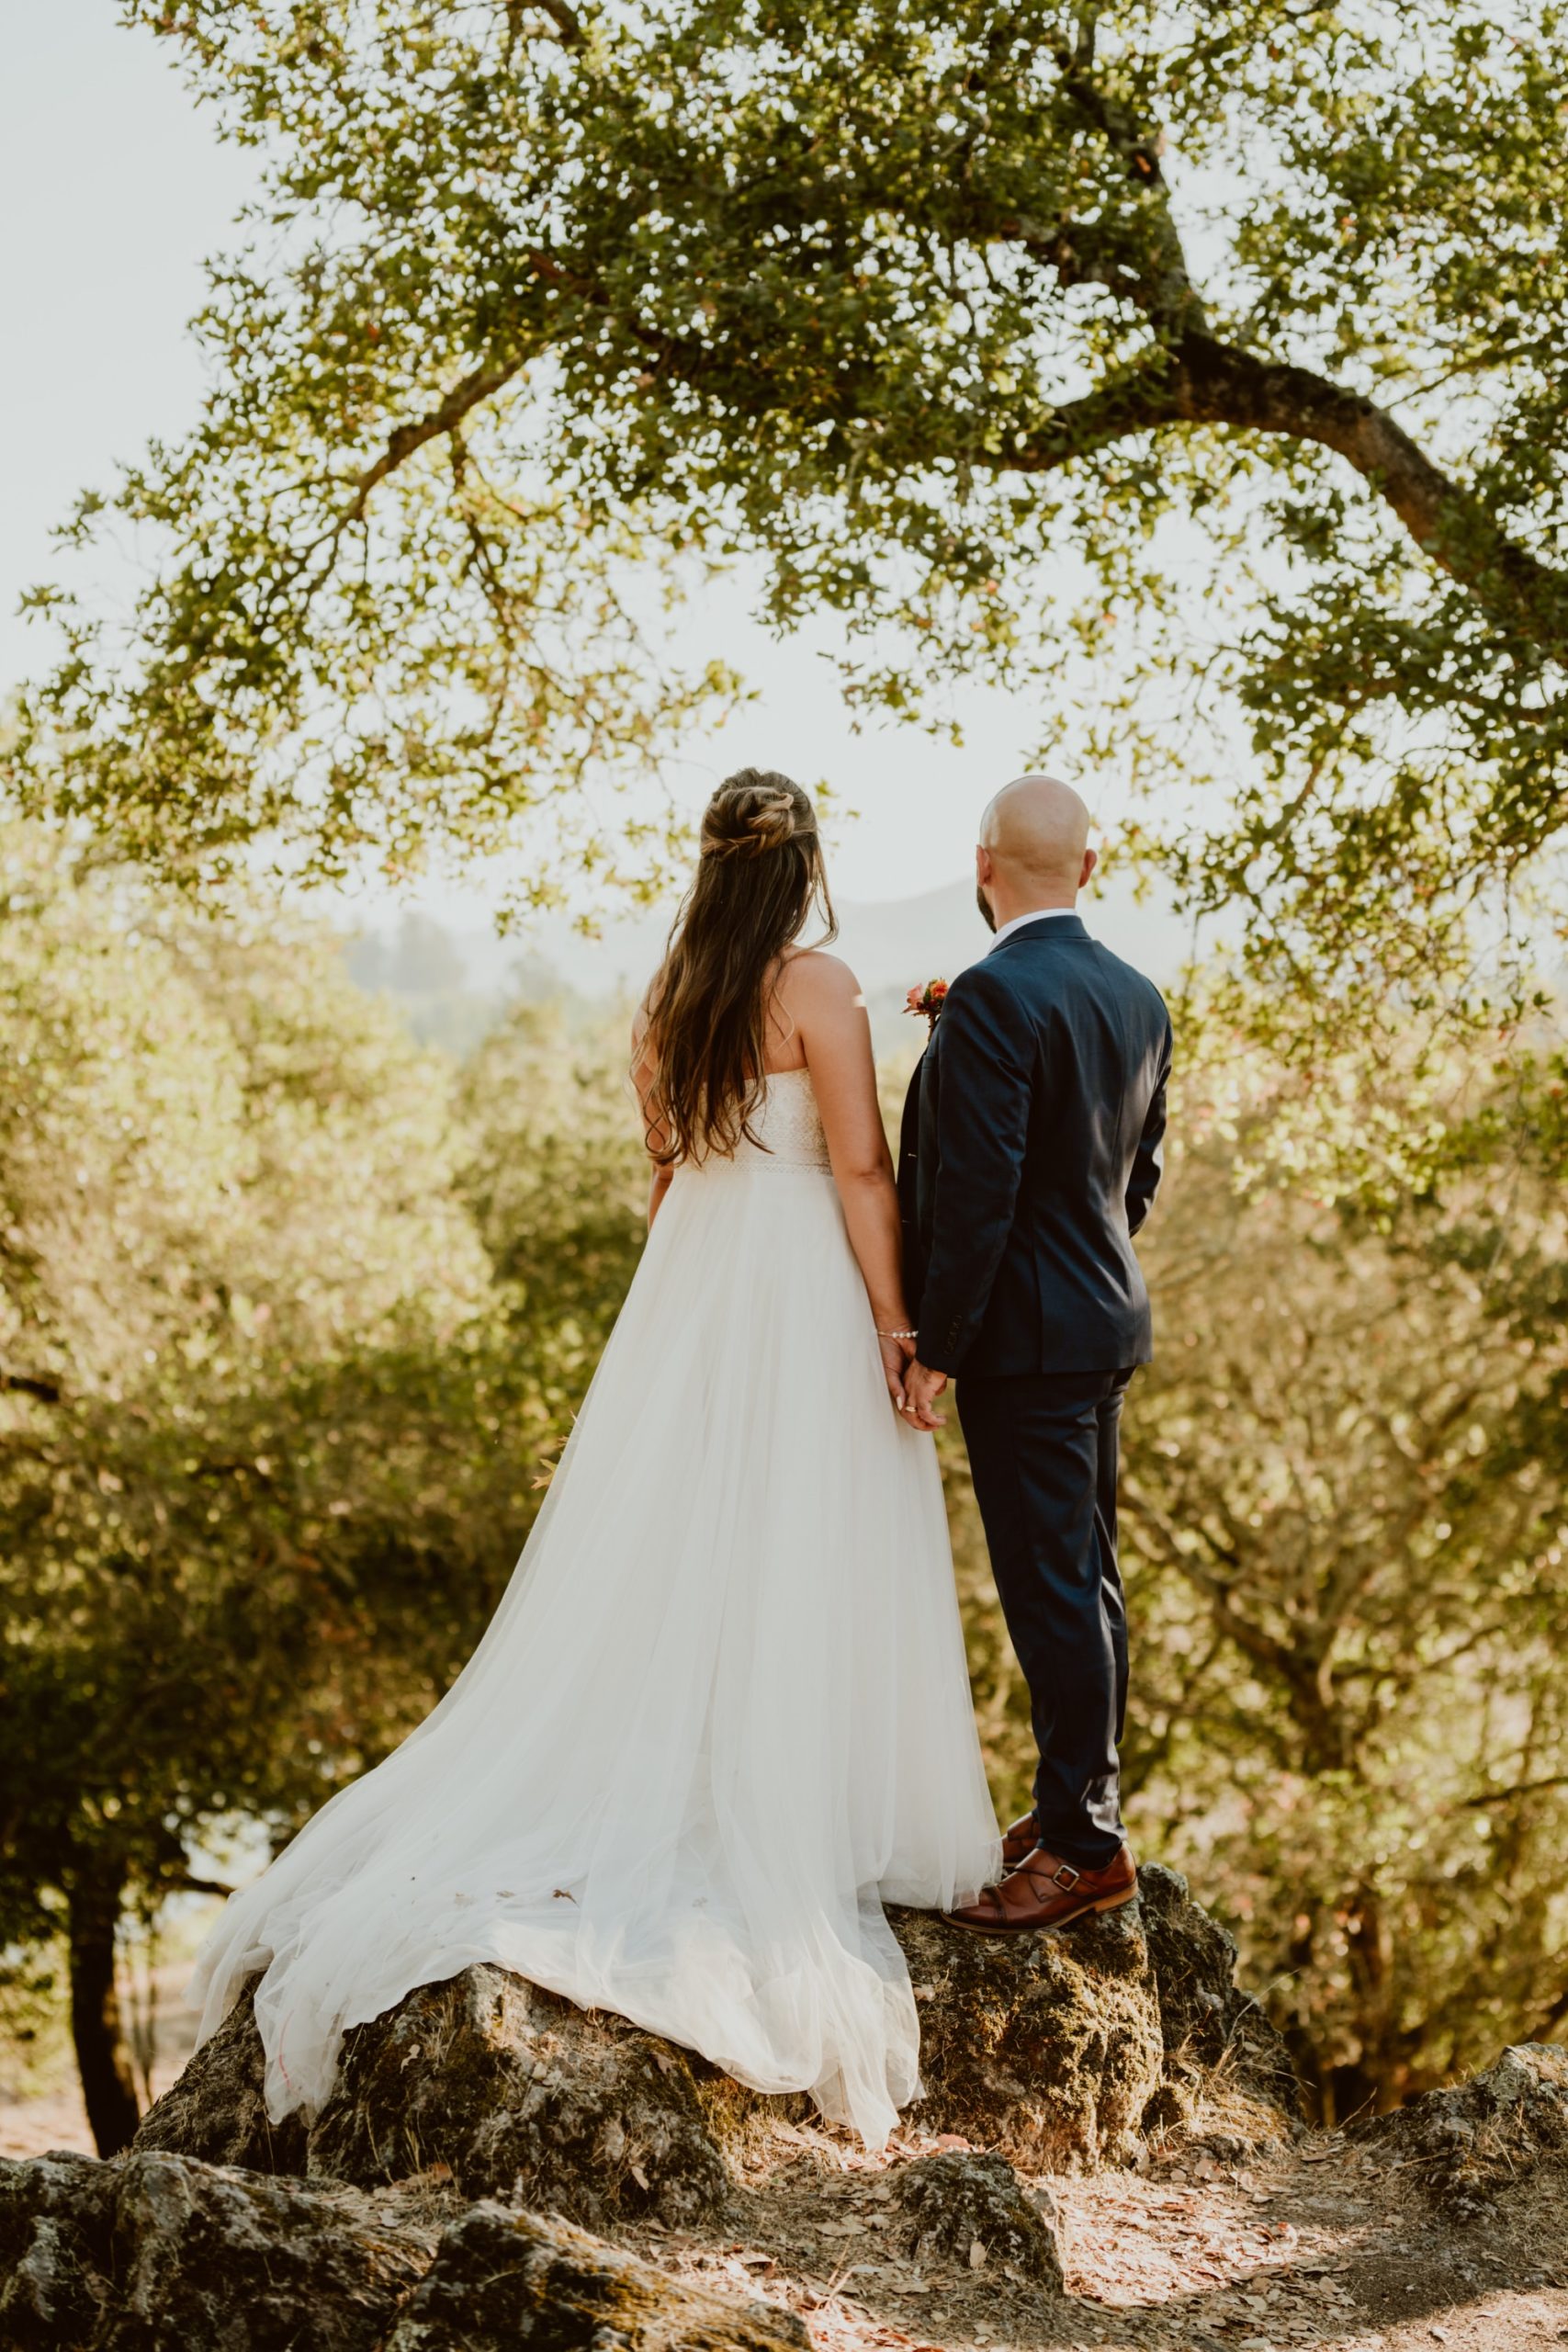 If you're currently grappling with making a Plan B or even Plan C because of covid, this backyard elopement in wine country will help give you some inspo!